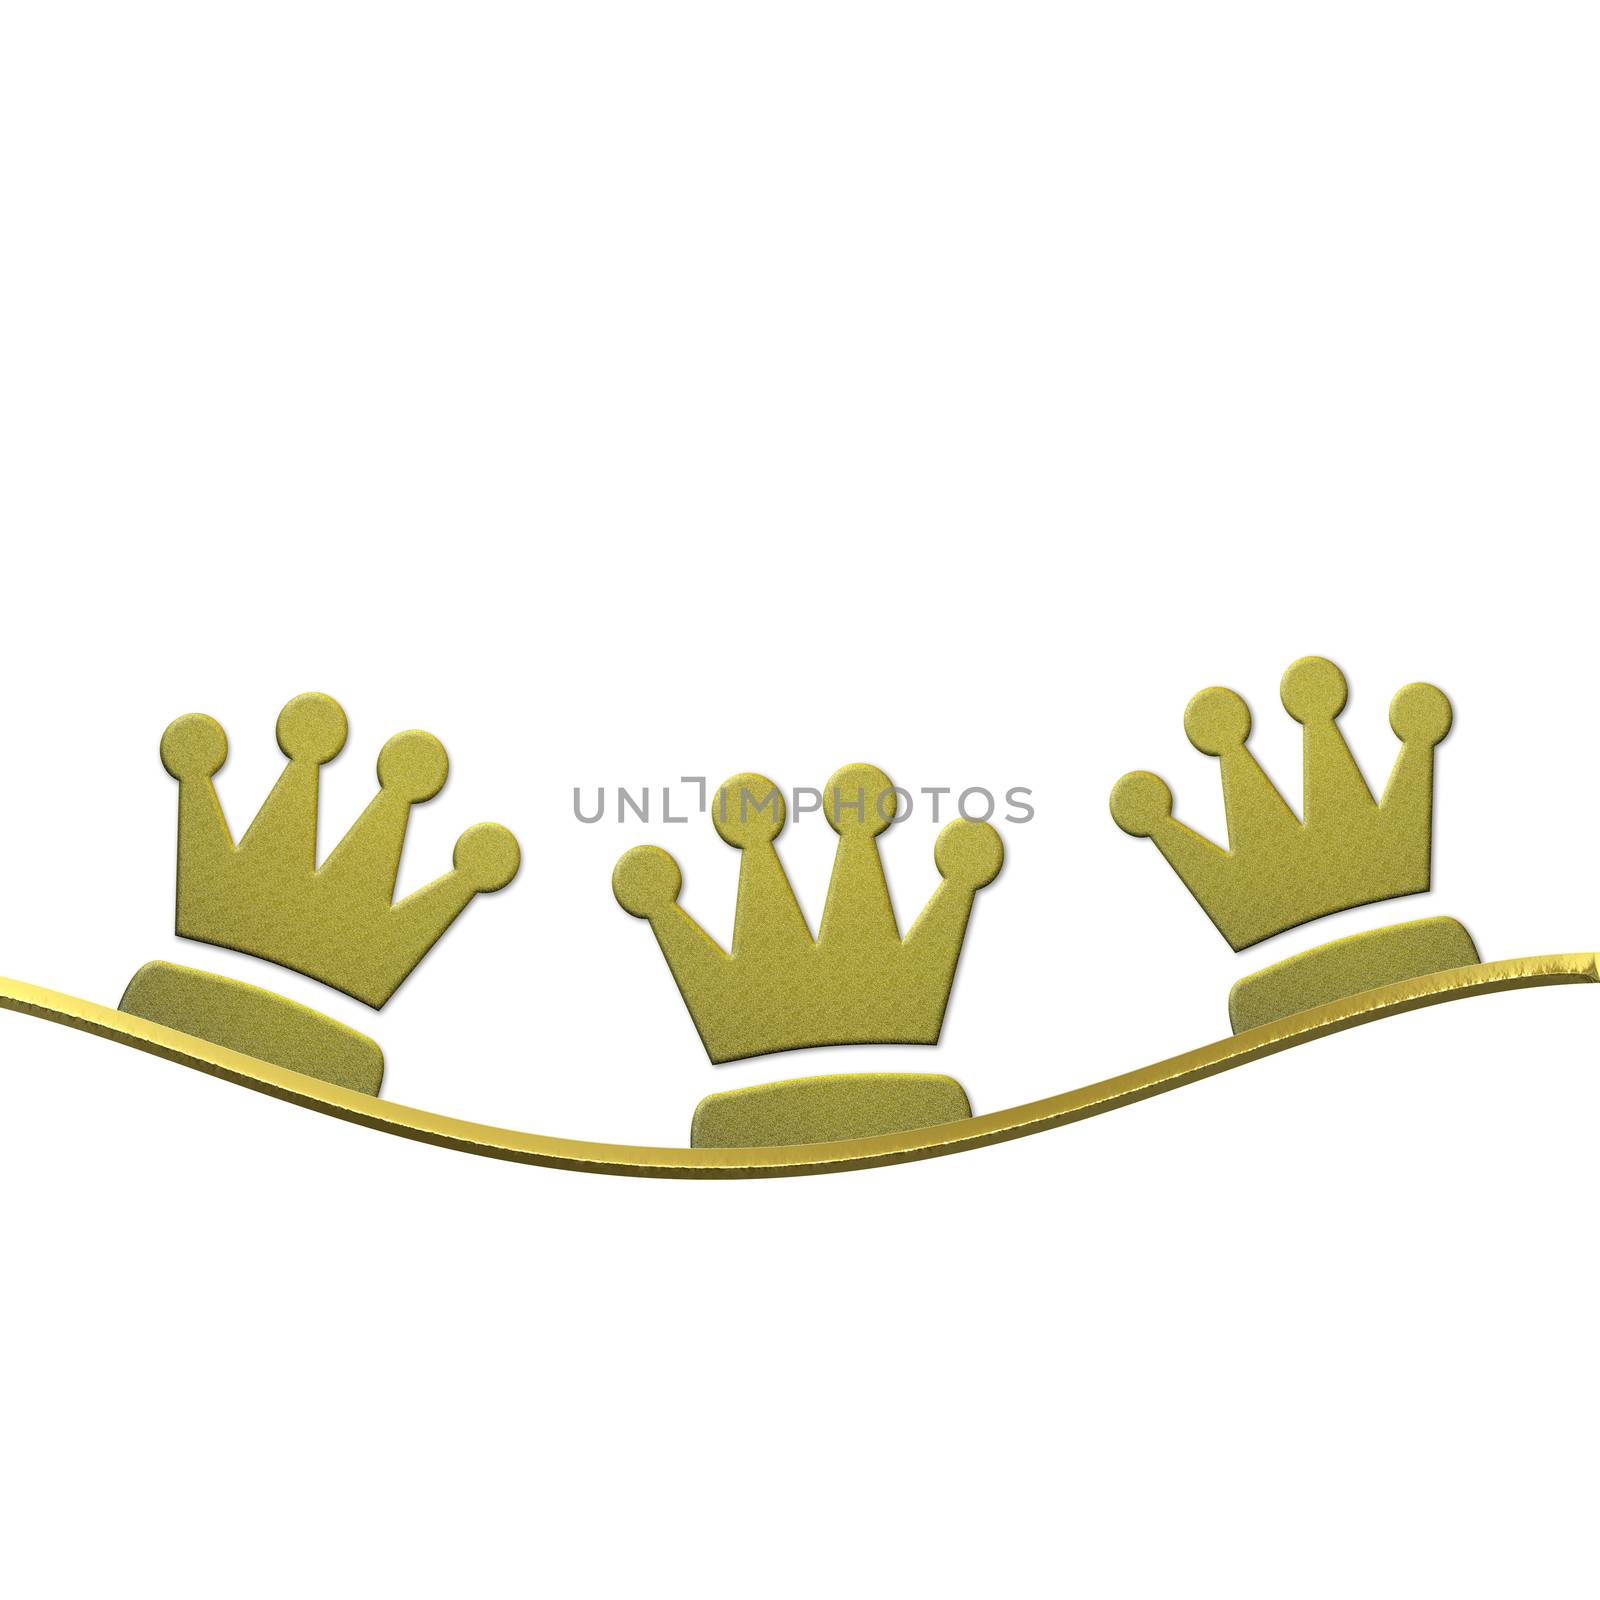 Christmas background, crowns of the Three wise men by Carche